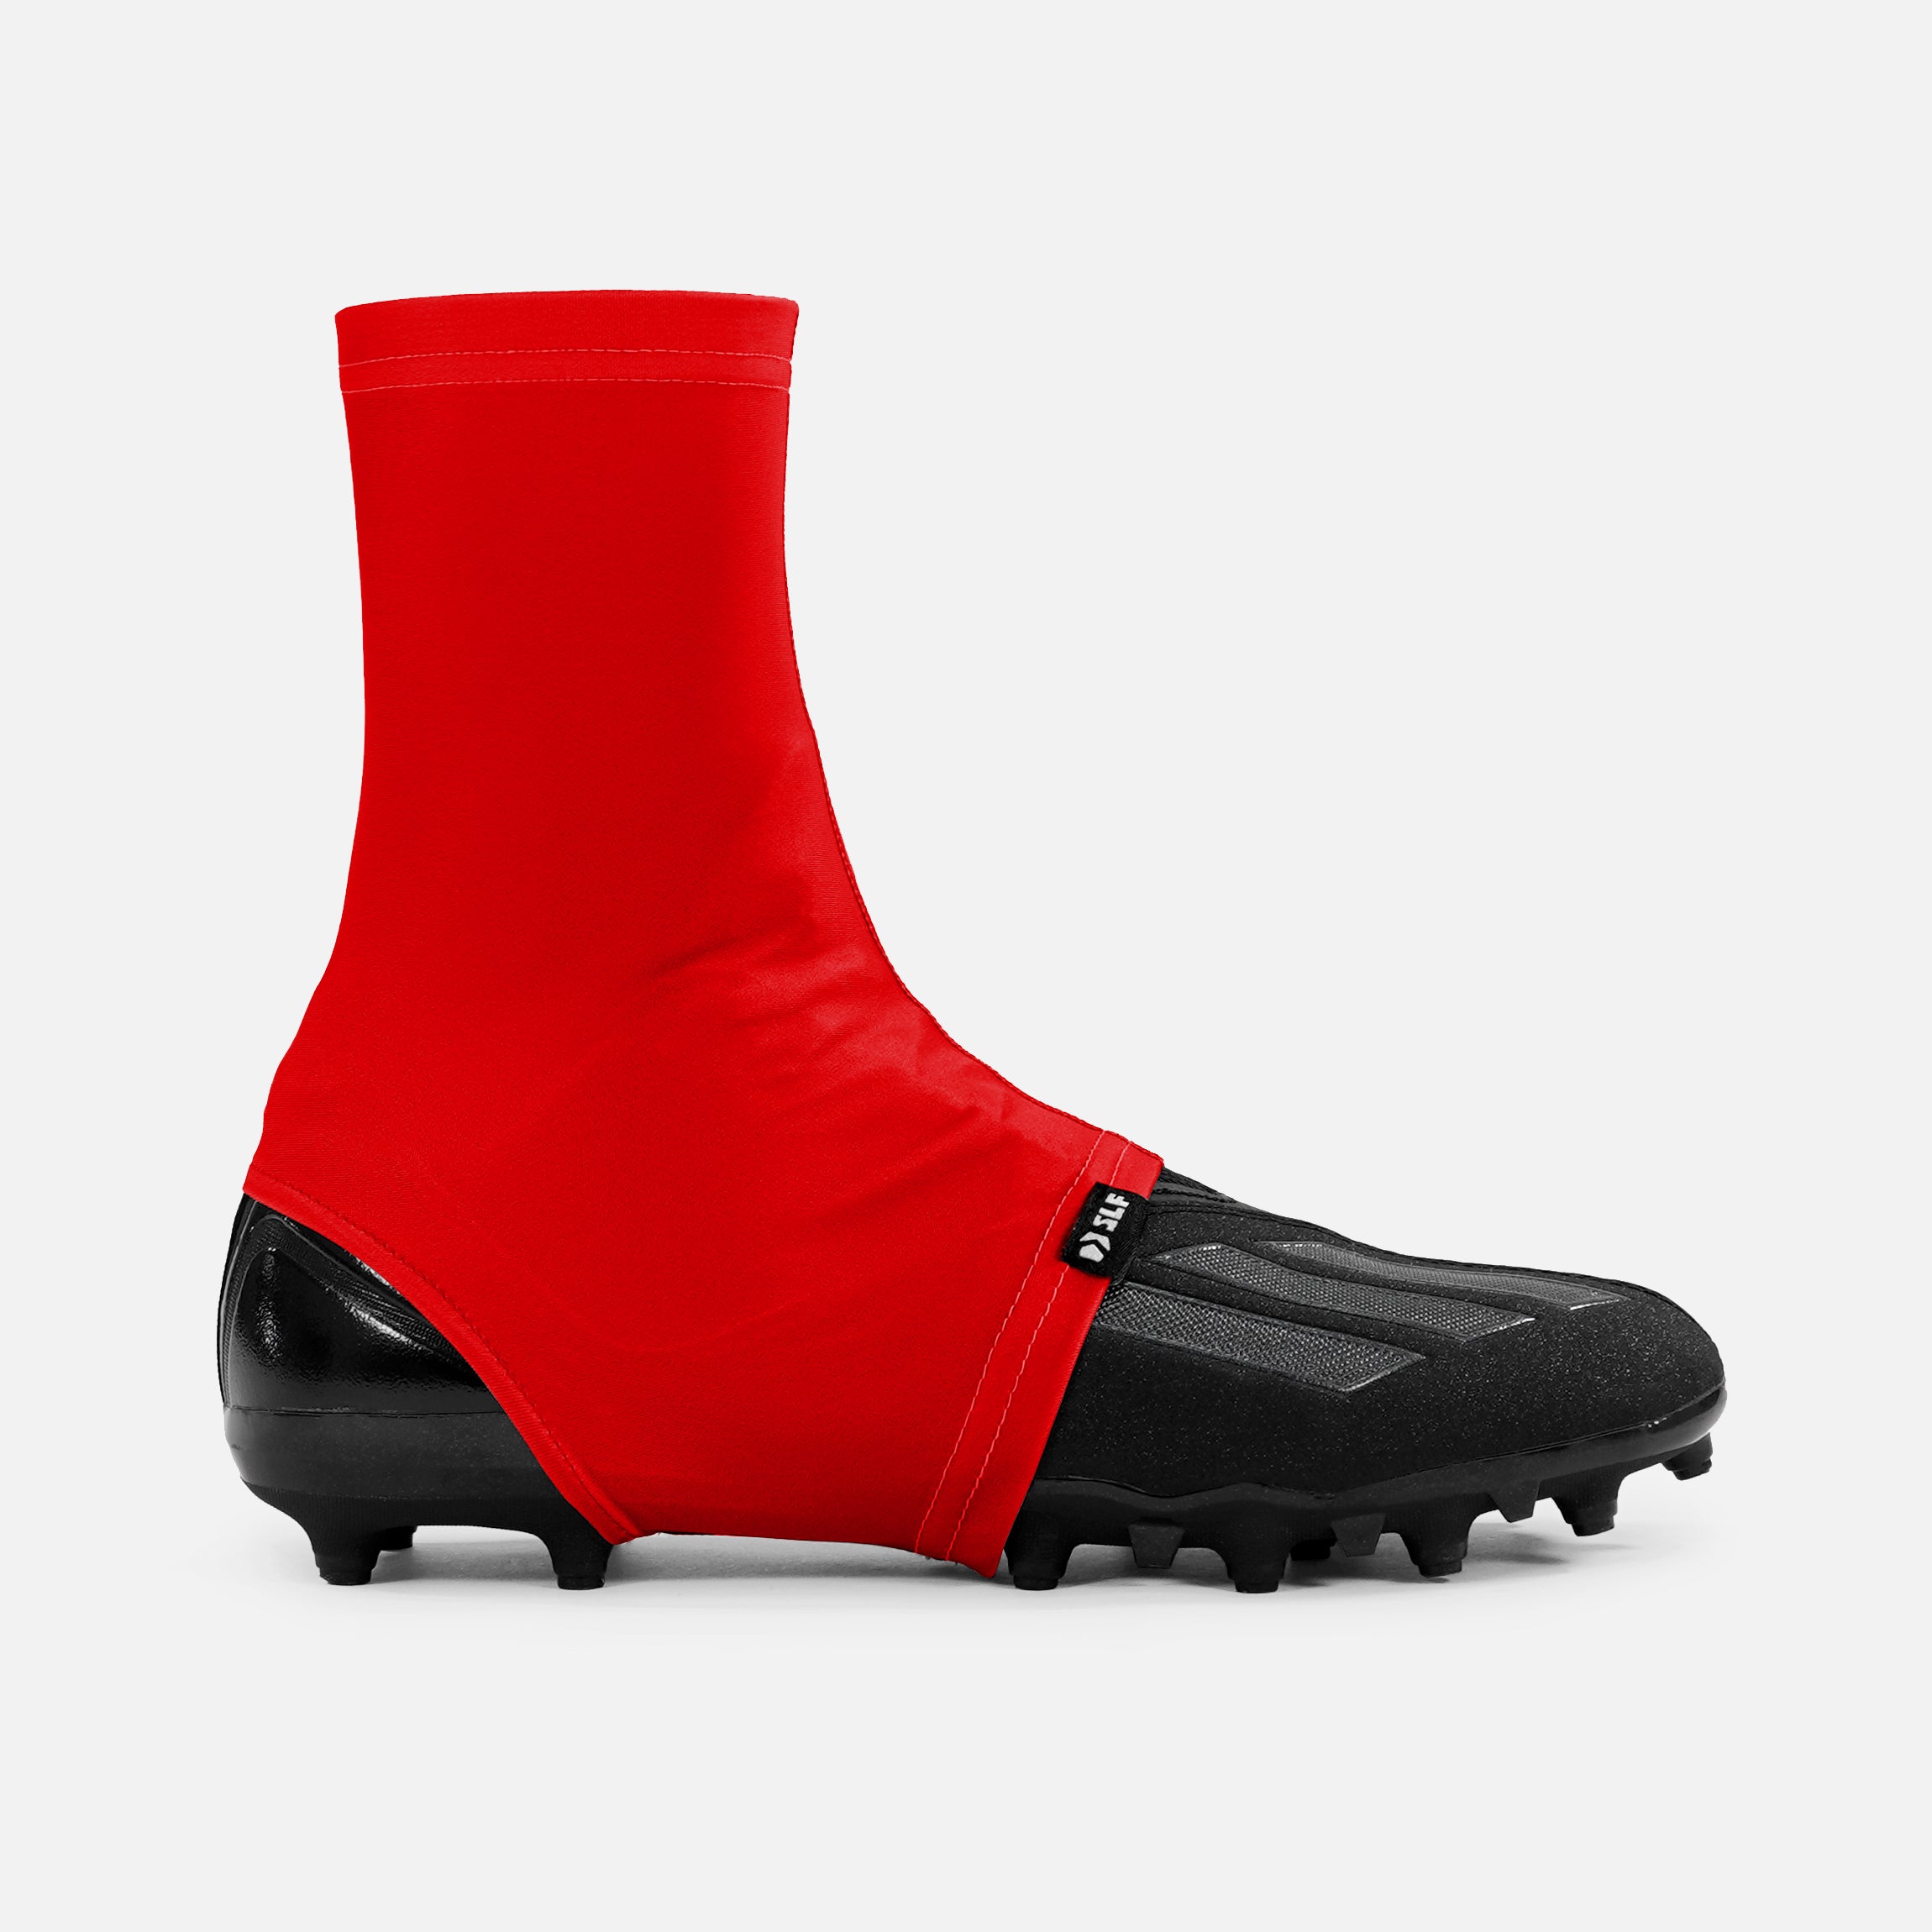 Hue Red Spats / Cleat Covers – SLEEFS